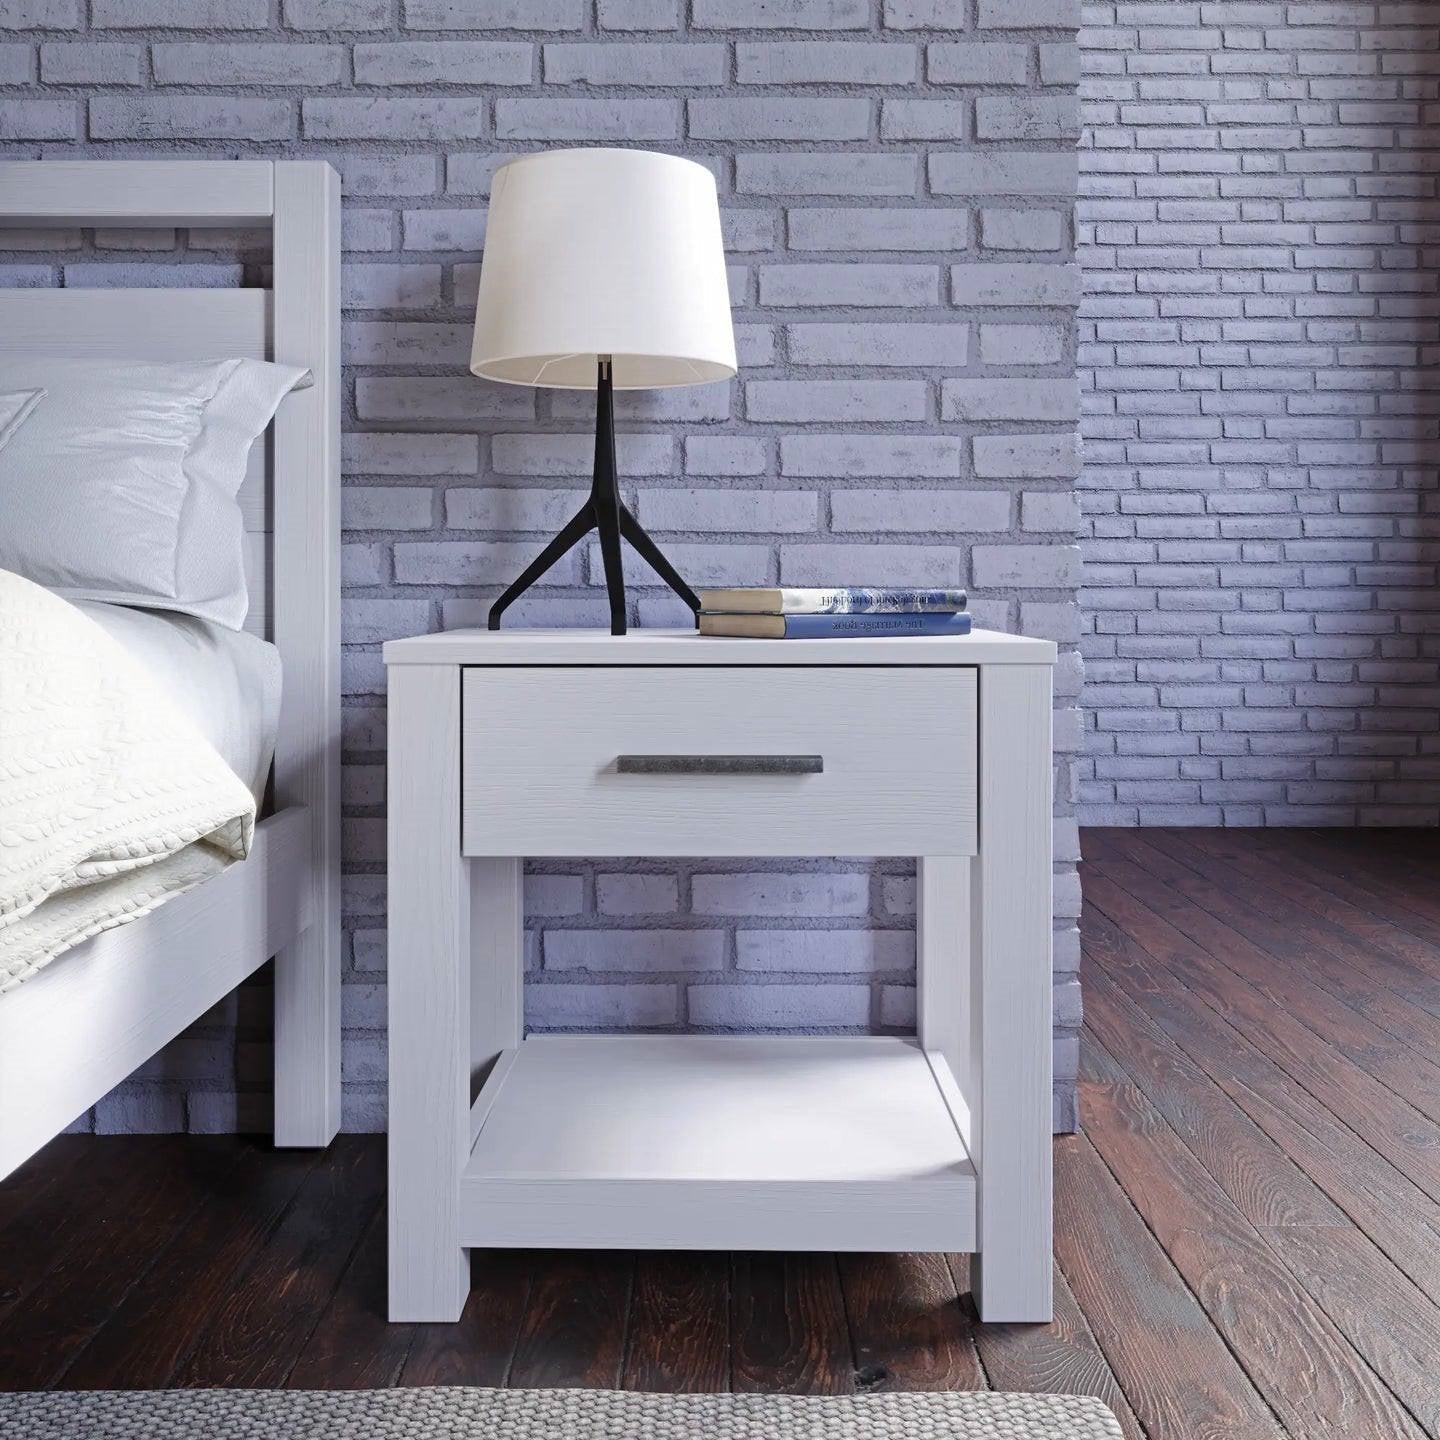 Bedroom > Nightstand And Dressers - Farmhouse Traditional Rustic White Pine Wood 1-Drawer Nightstand Bedside Table